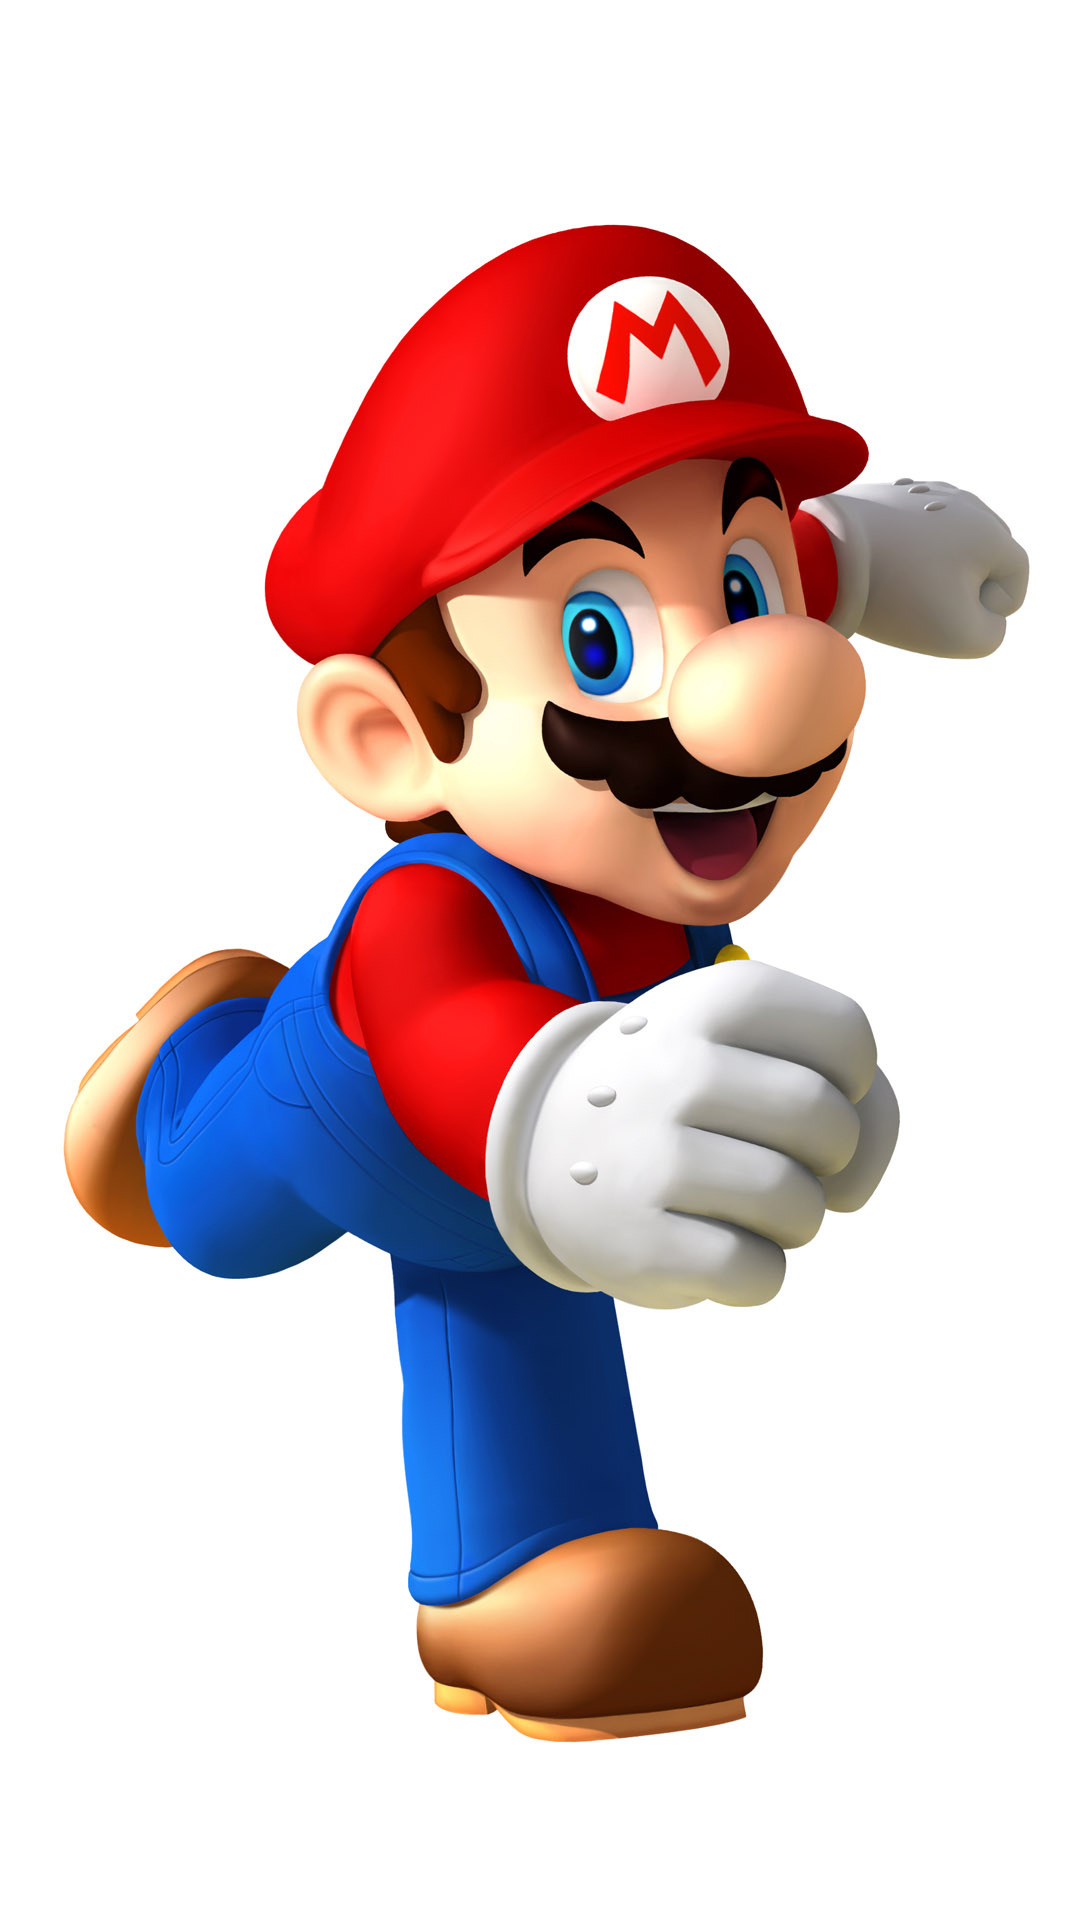 1080x1920 Super Mario wallpapers for iPhone